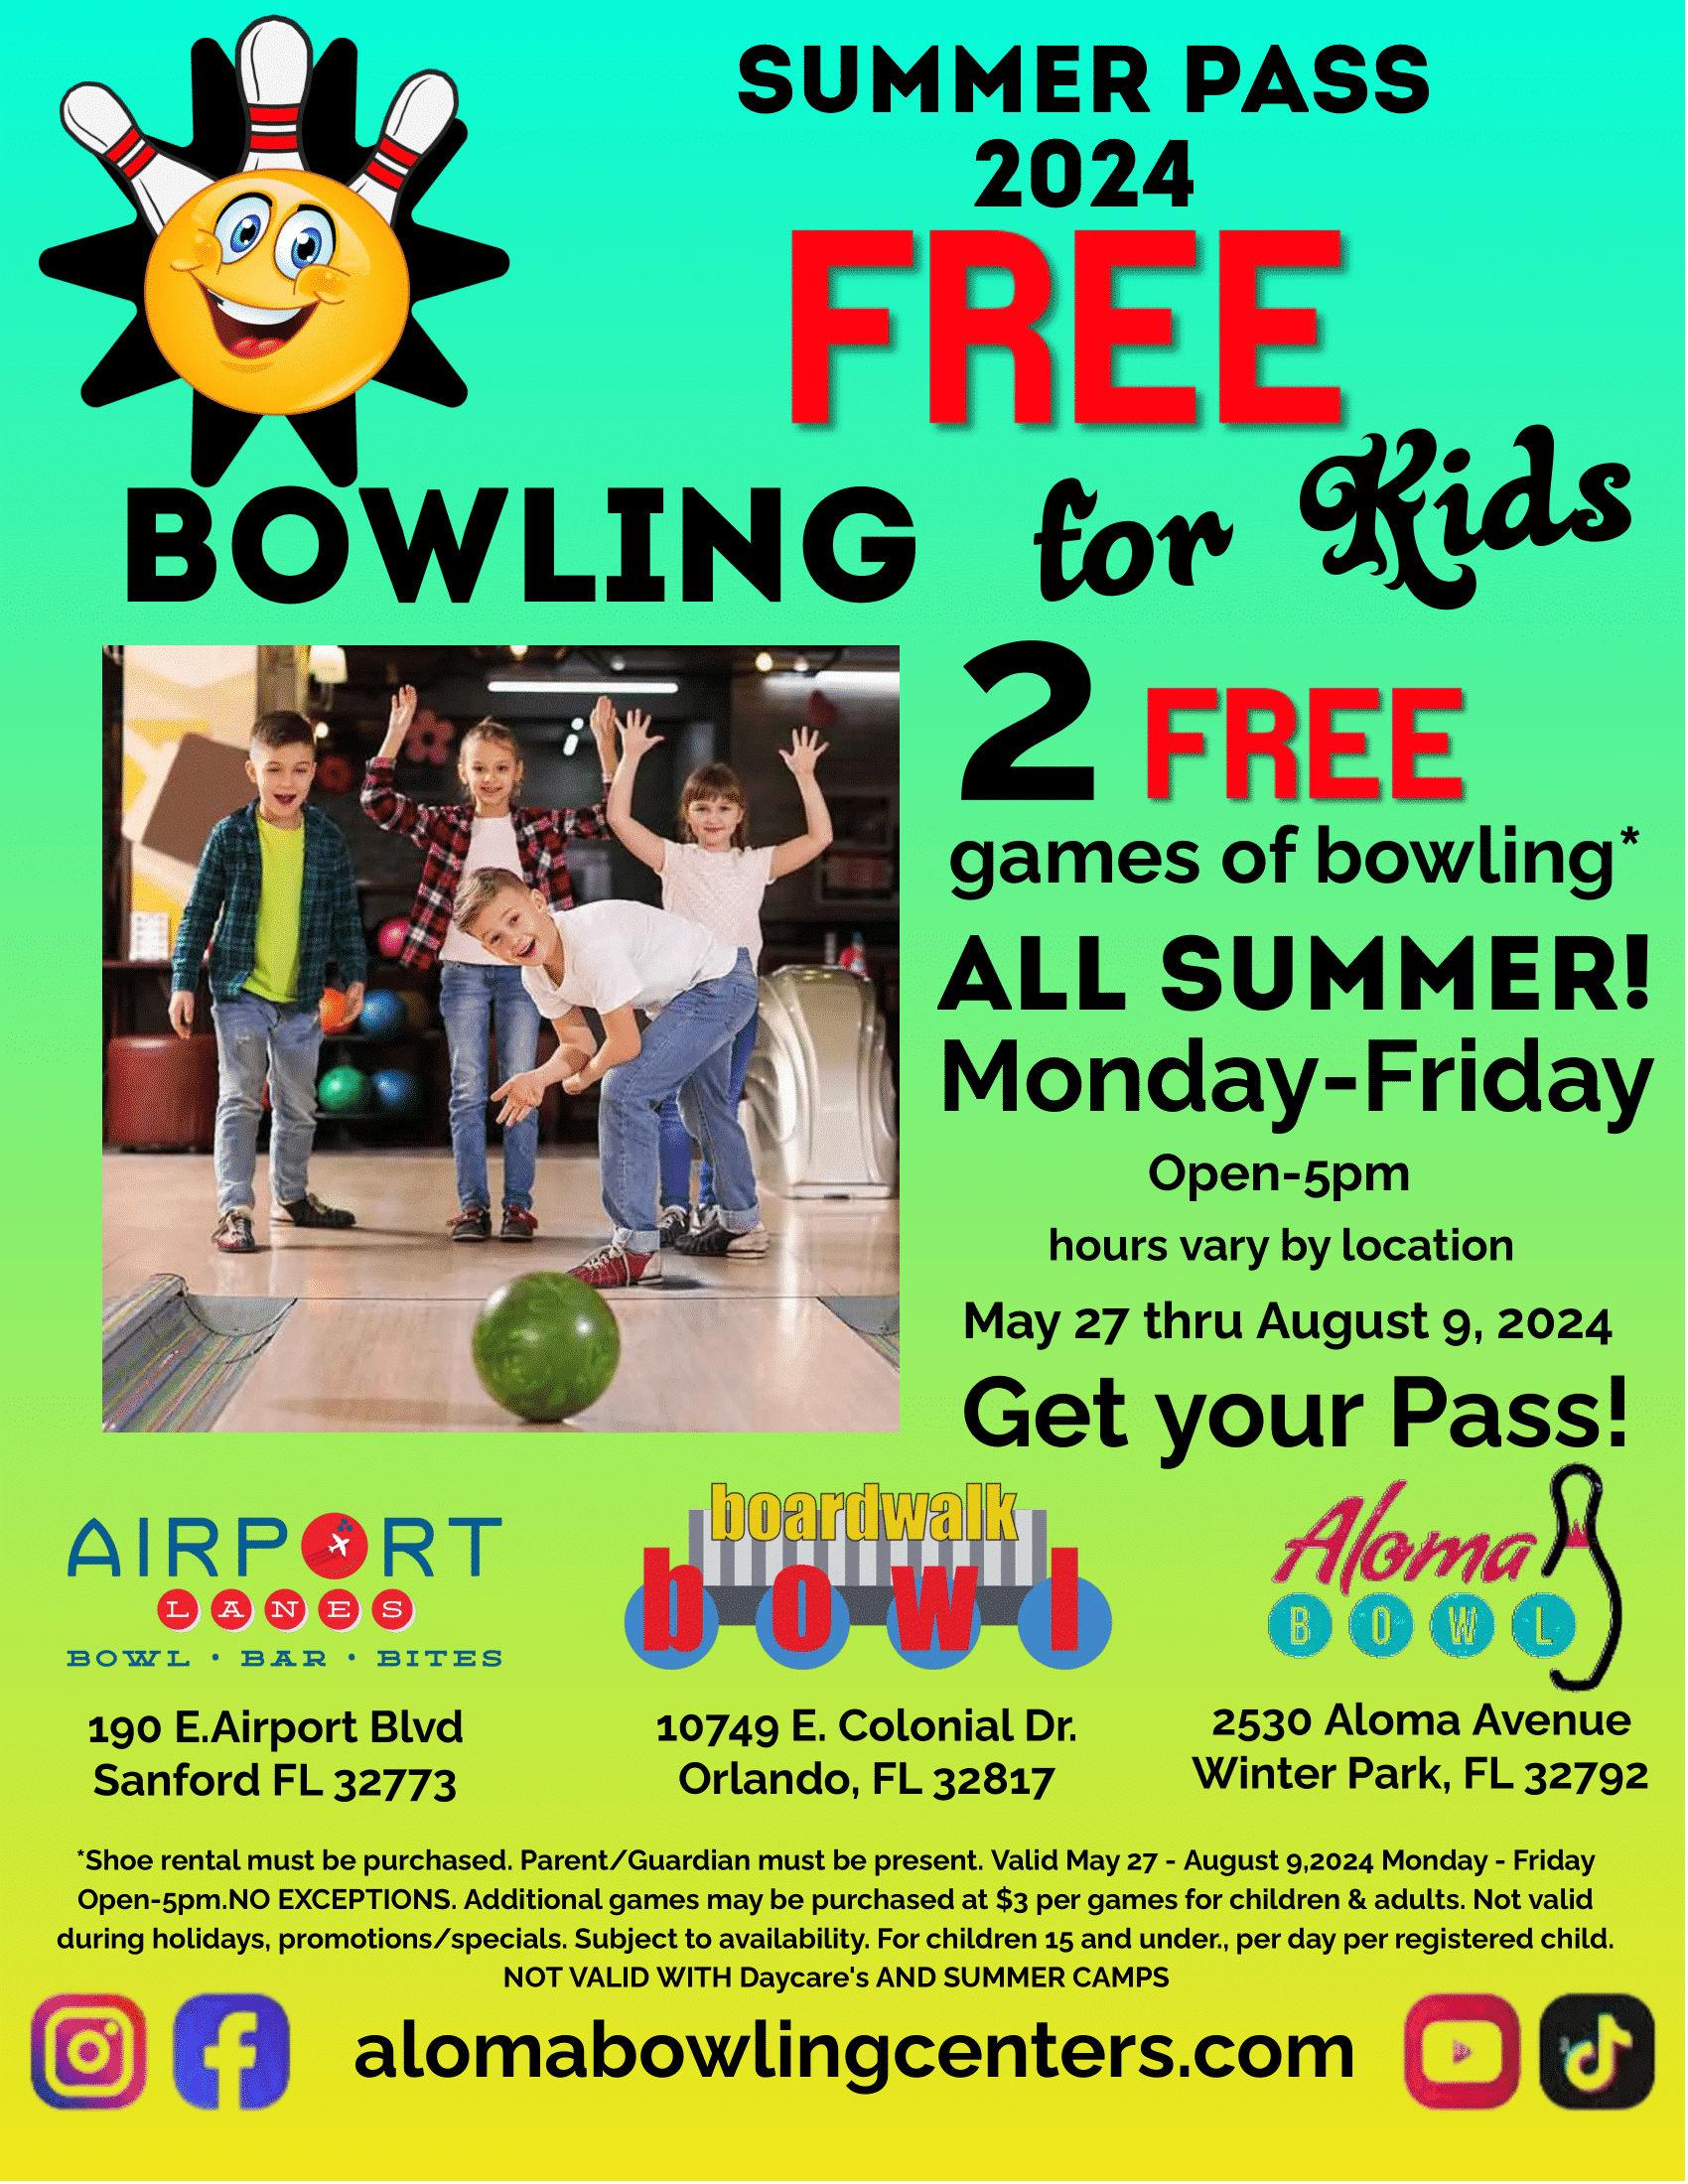 Free Bowling Returns for Kids This Summer at Aloma Bowling Centers 2024